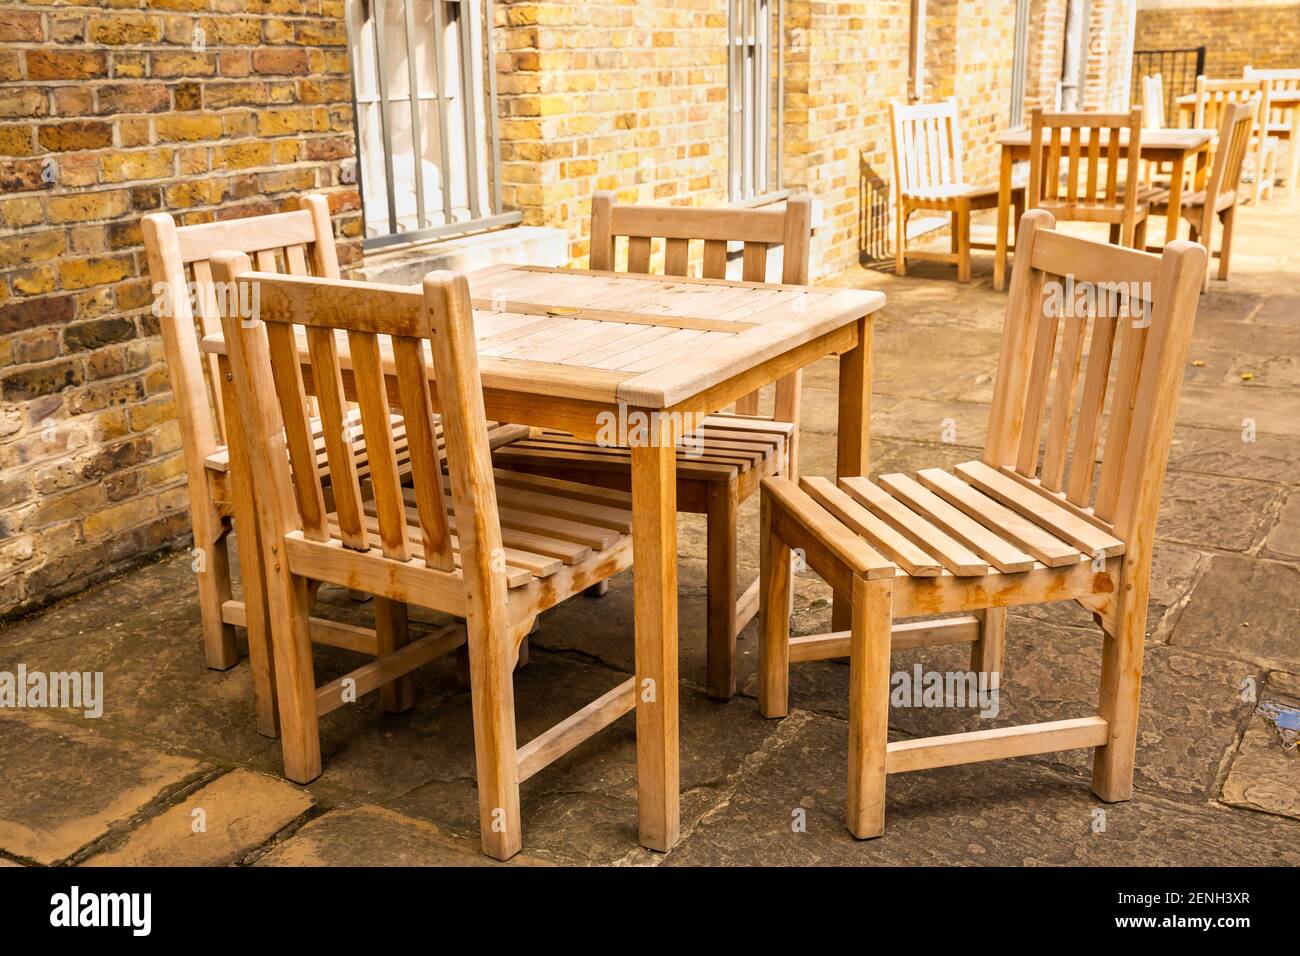 Wooden tables and chairs of outdoors cafe in London. Stock Photo